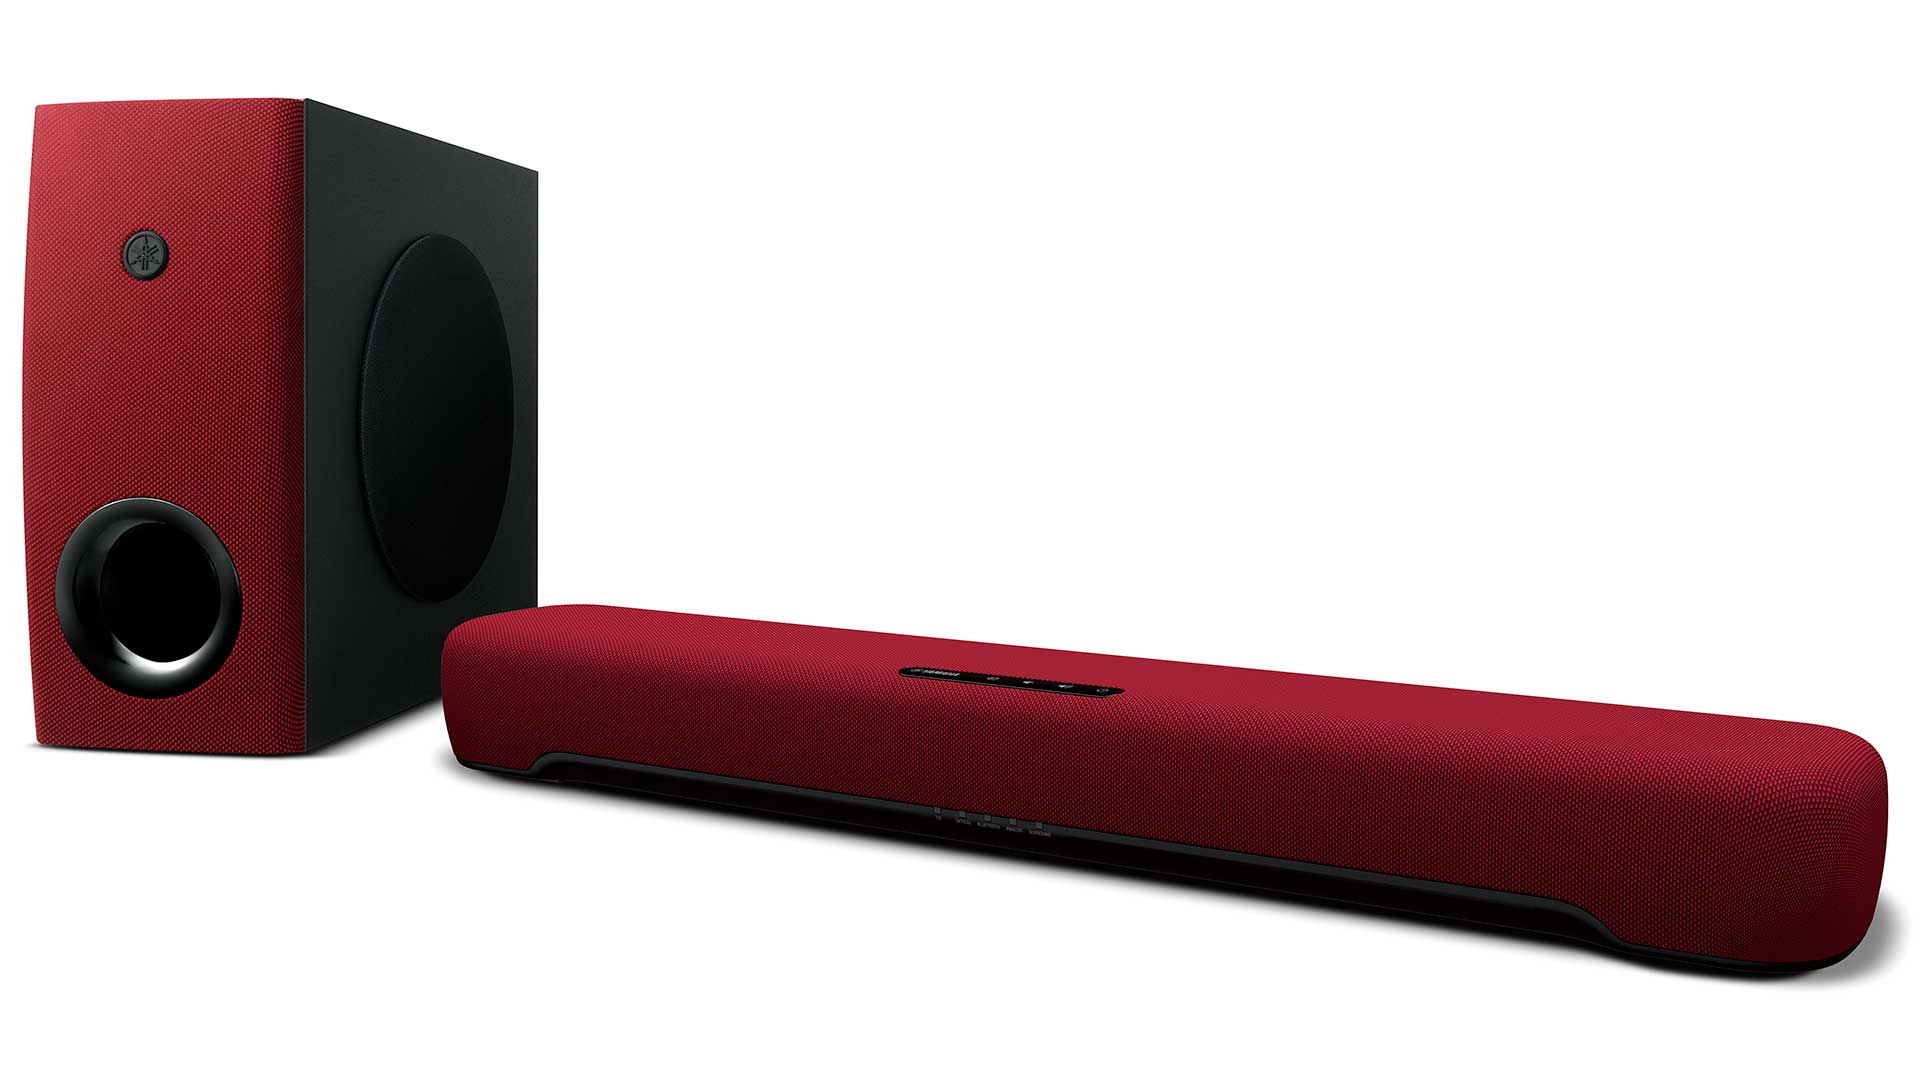 Yamaha sees red with its latest SR-C30A soundbar and subwoofer